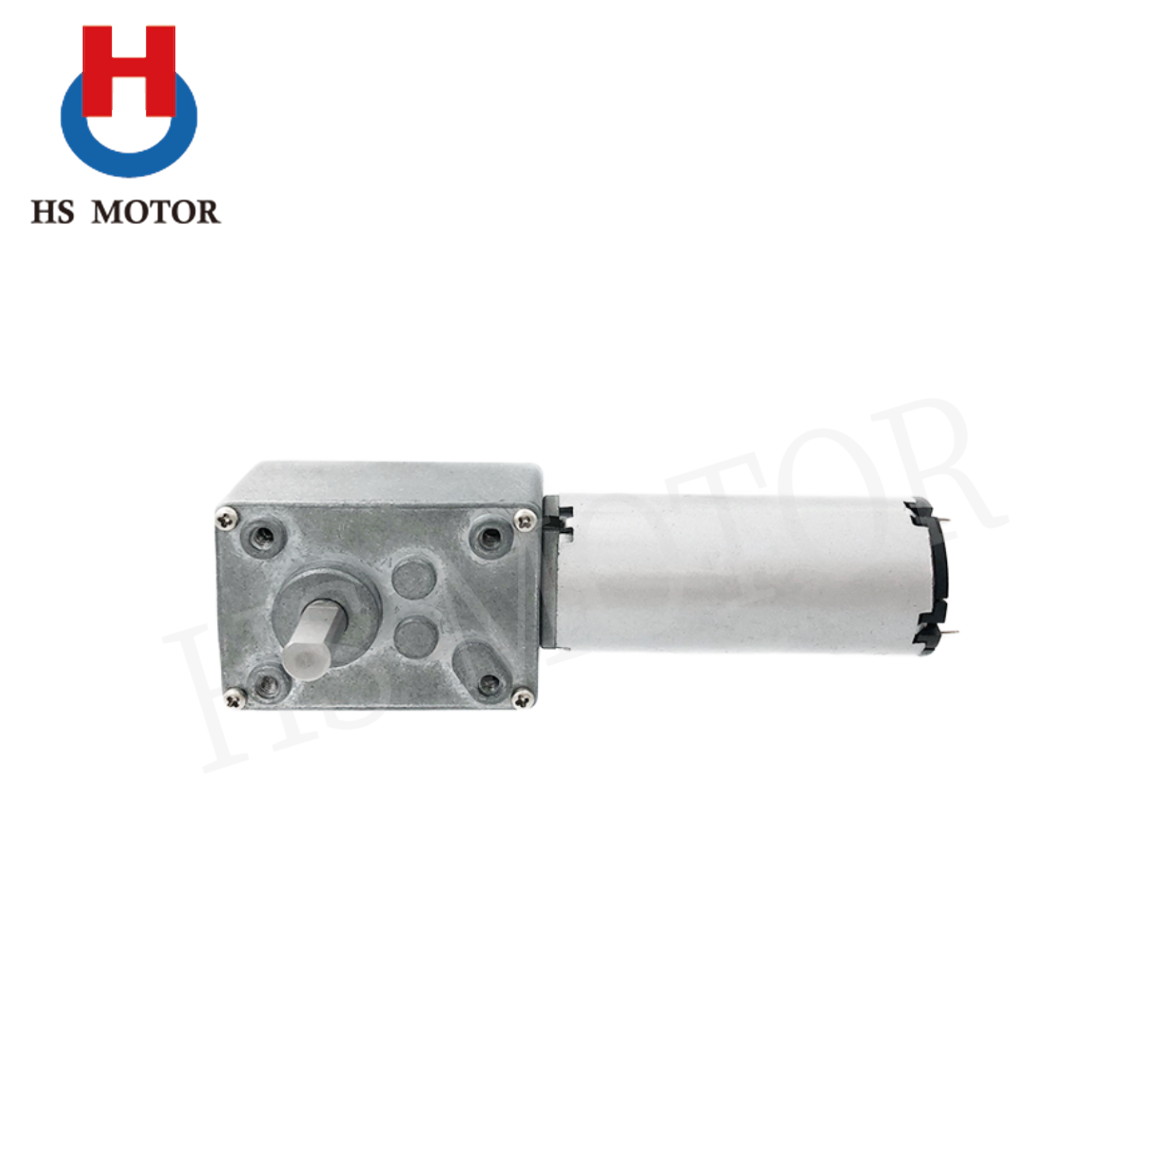 Tower-Type Gearbox Motor 40mm Square Gearbox